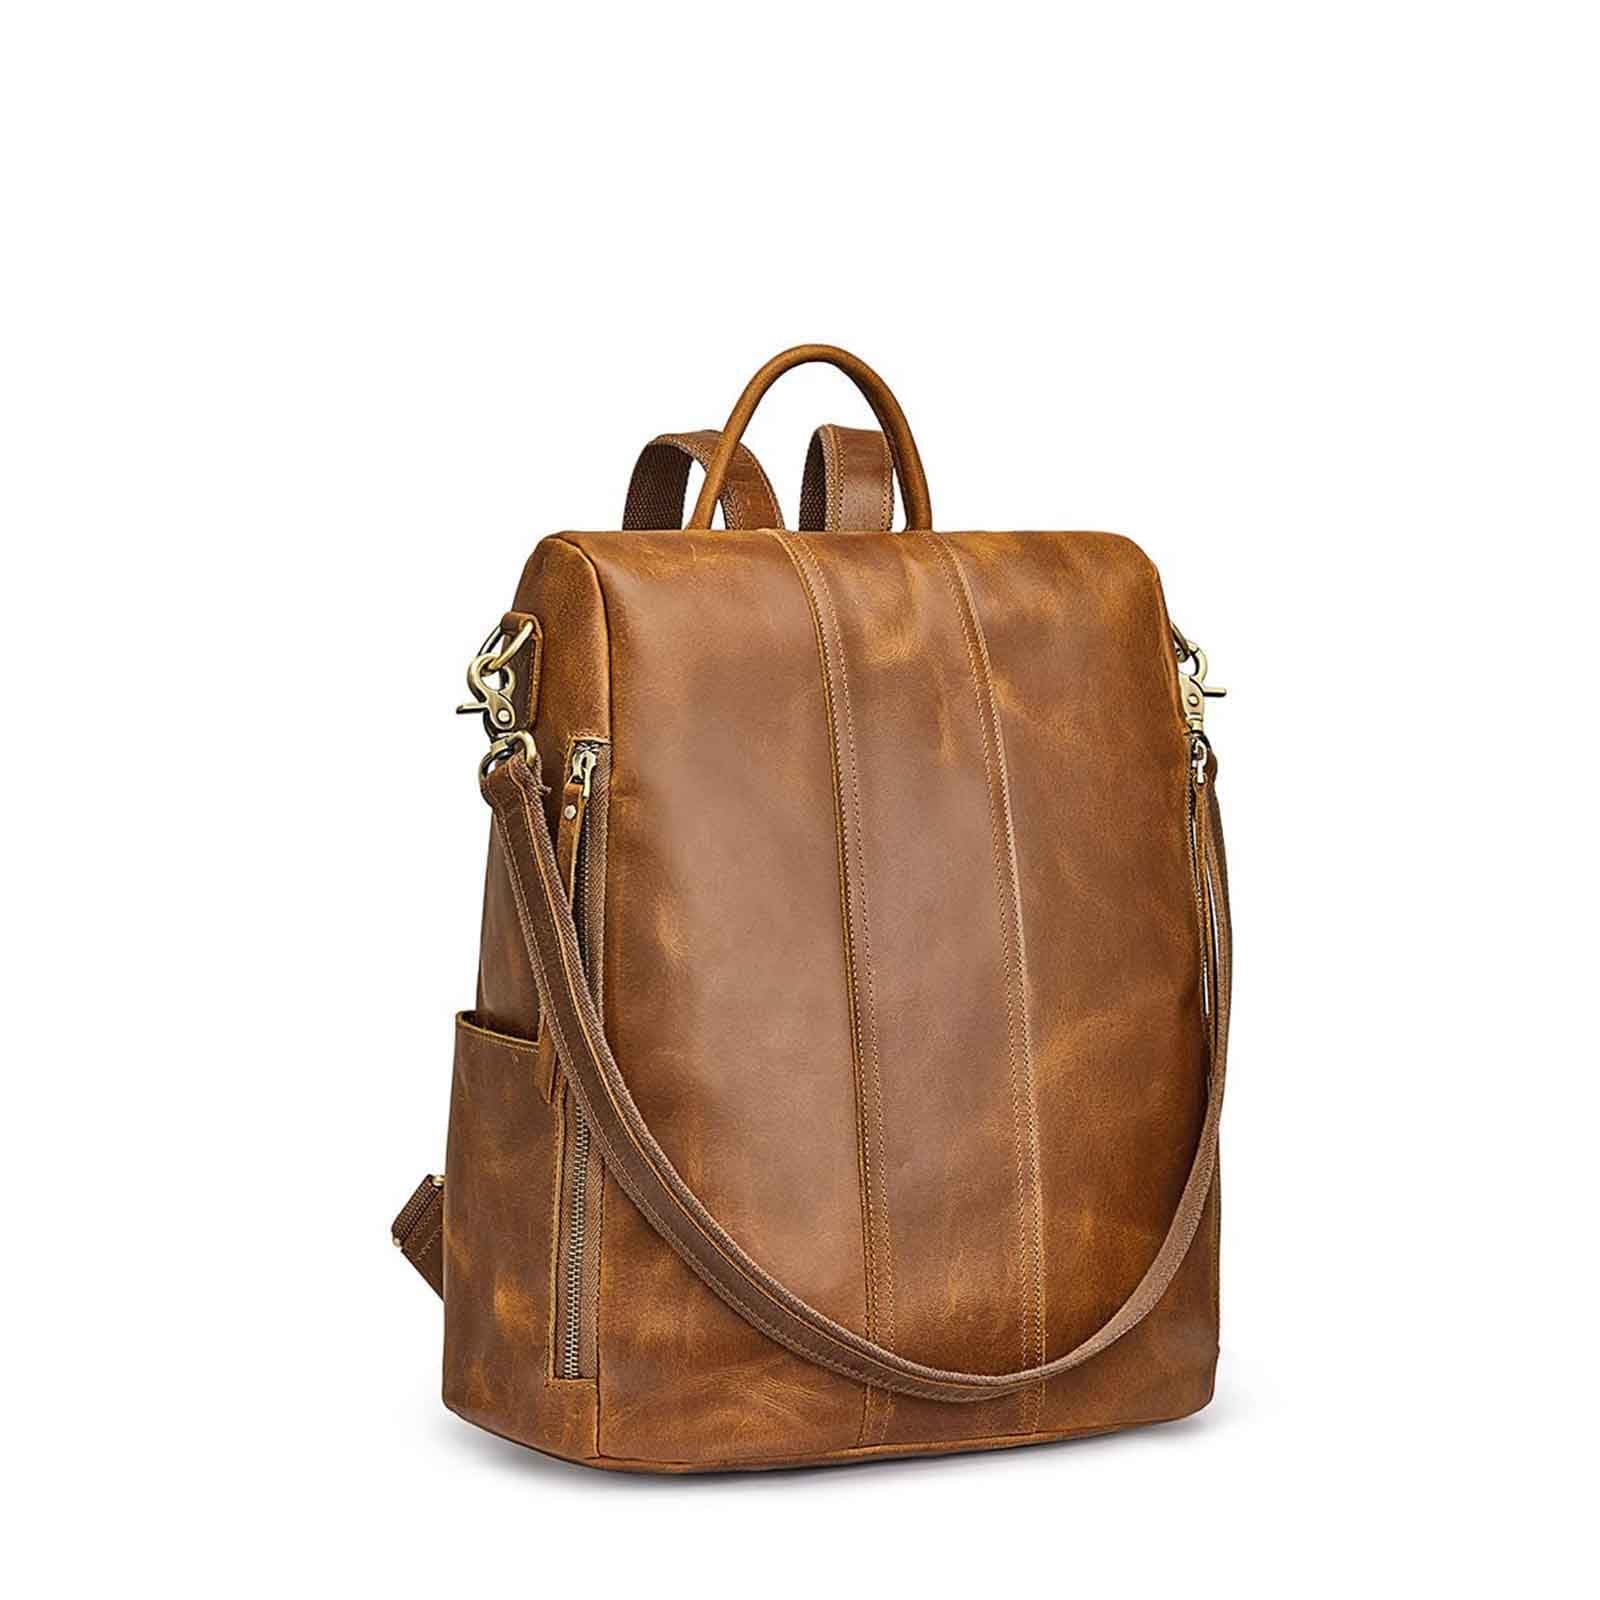 Anti-Theft Vintage Leather Backpack